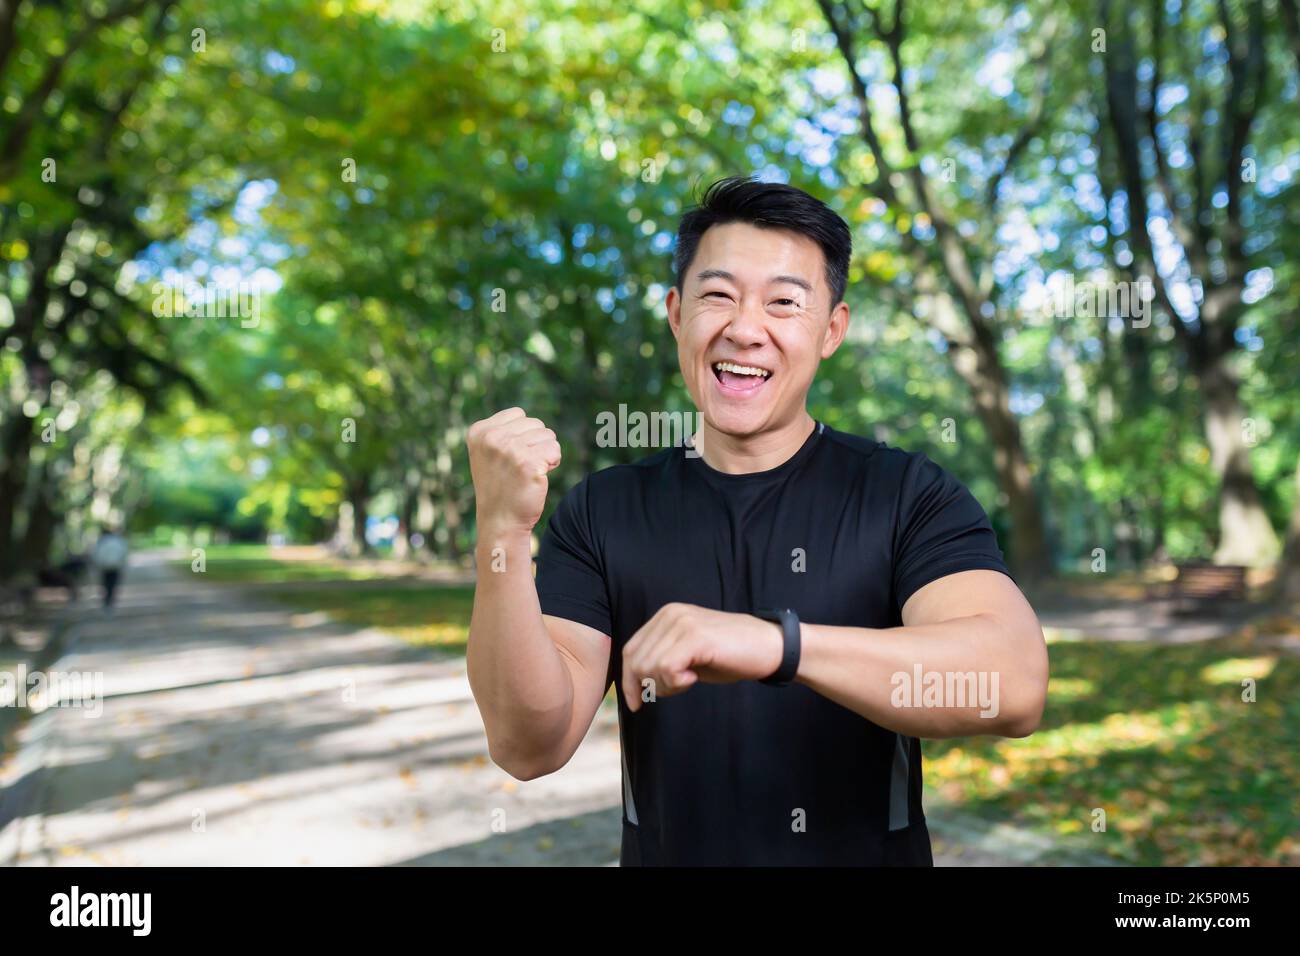 Happy and successful man looking at camera and smiling, asian sportsman satisfied with training result, using fitness bracelet smartwatch, holding hand up celebrating victory, success gesture. Stock Photo